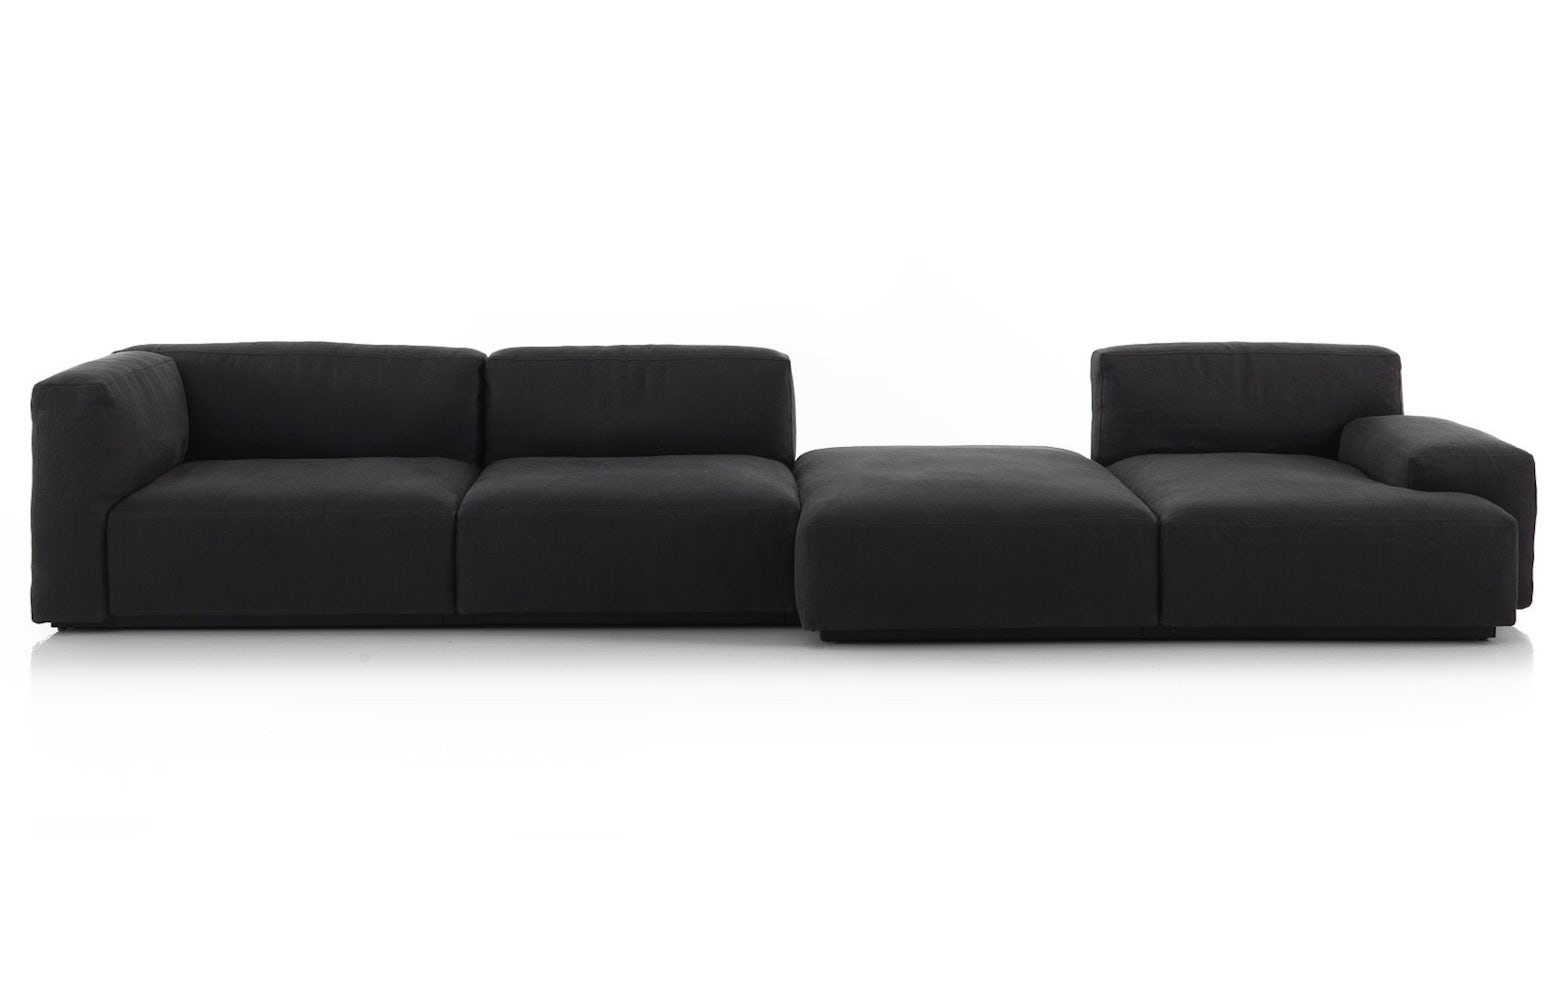 Mex Cube Seating System Cassina 6